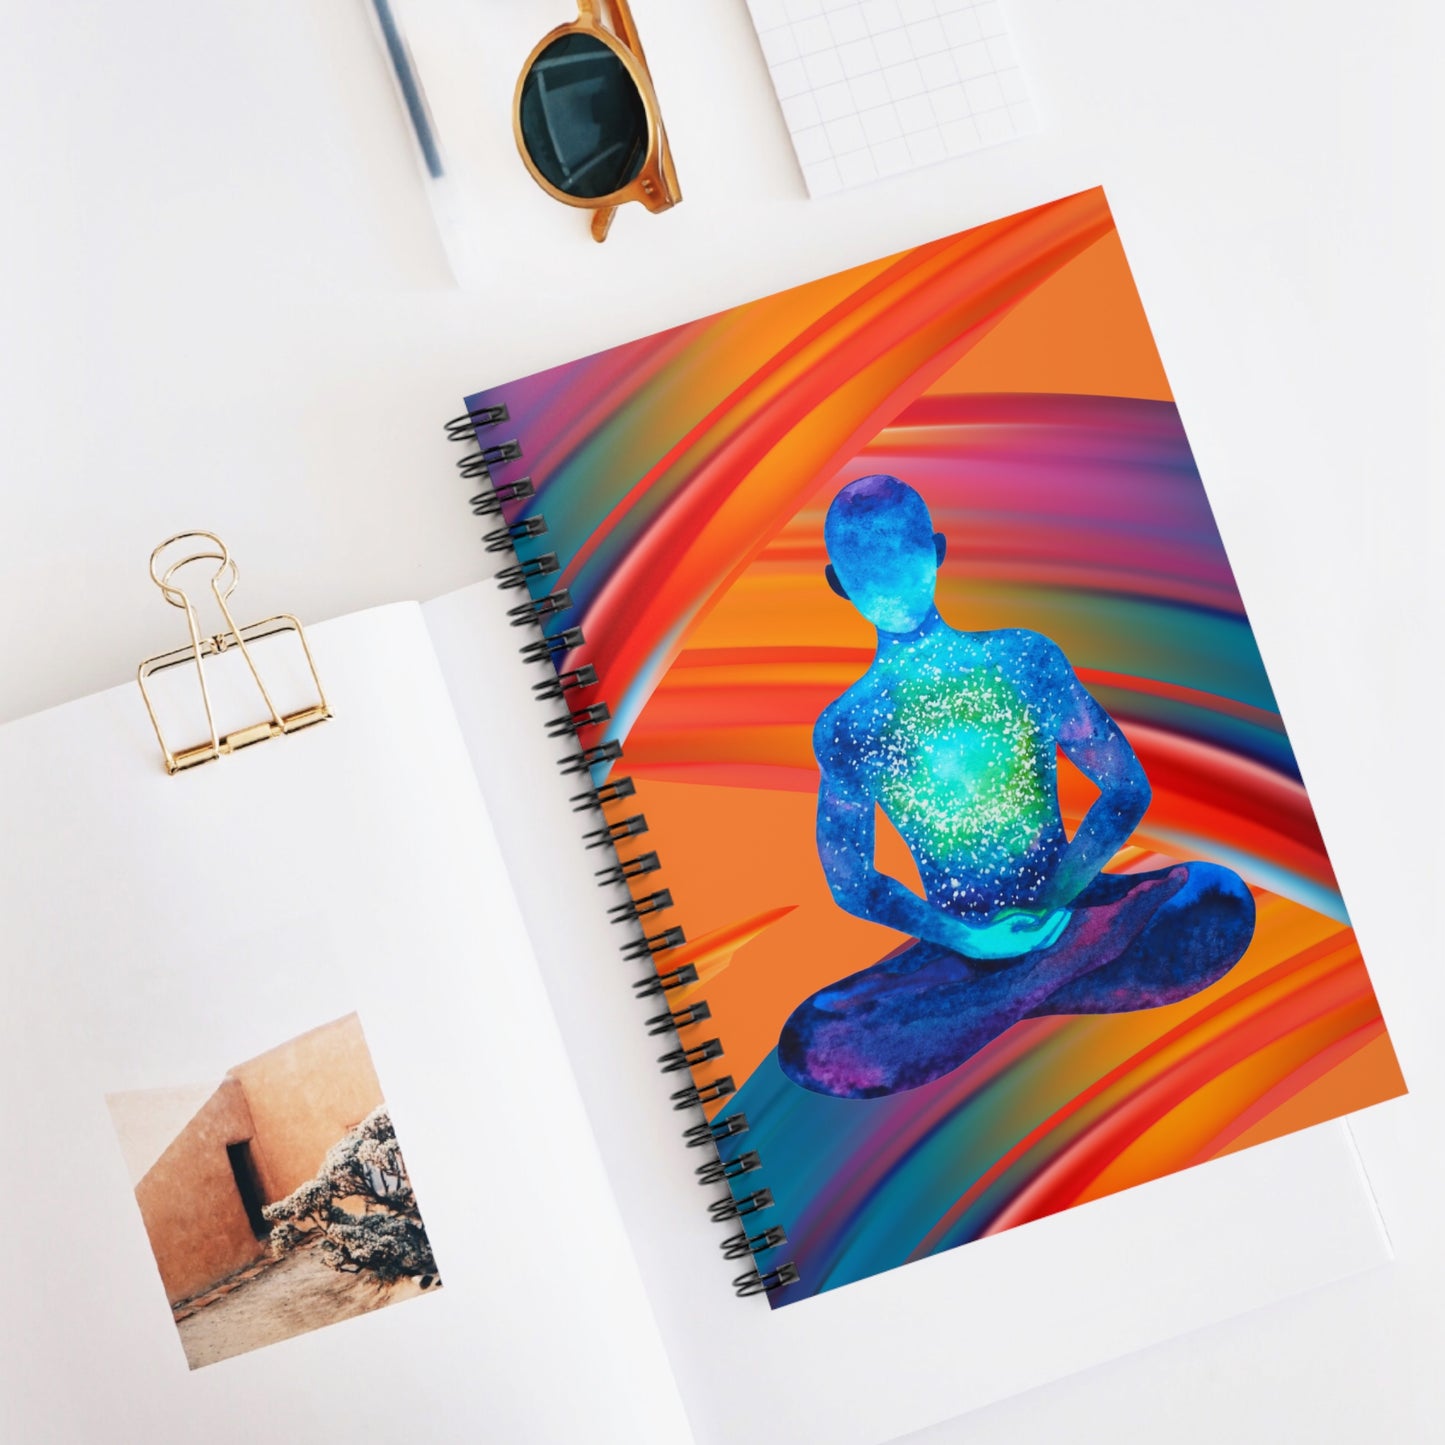 Peace from Within: Spiral Notebook - Log Books - Journals - Diaries - and More Custom Printed by TheGlassyLass